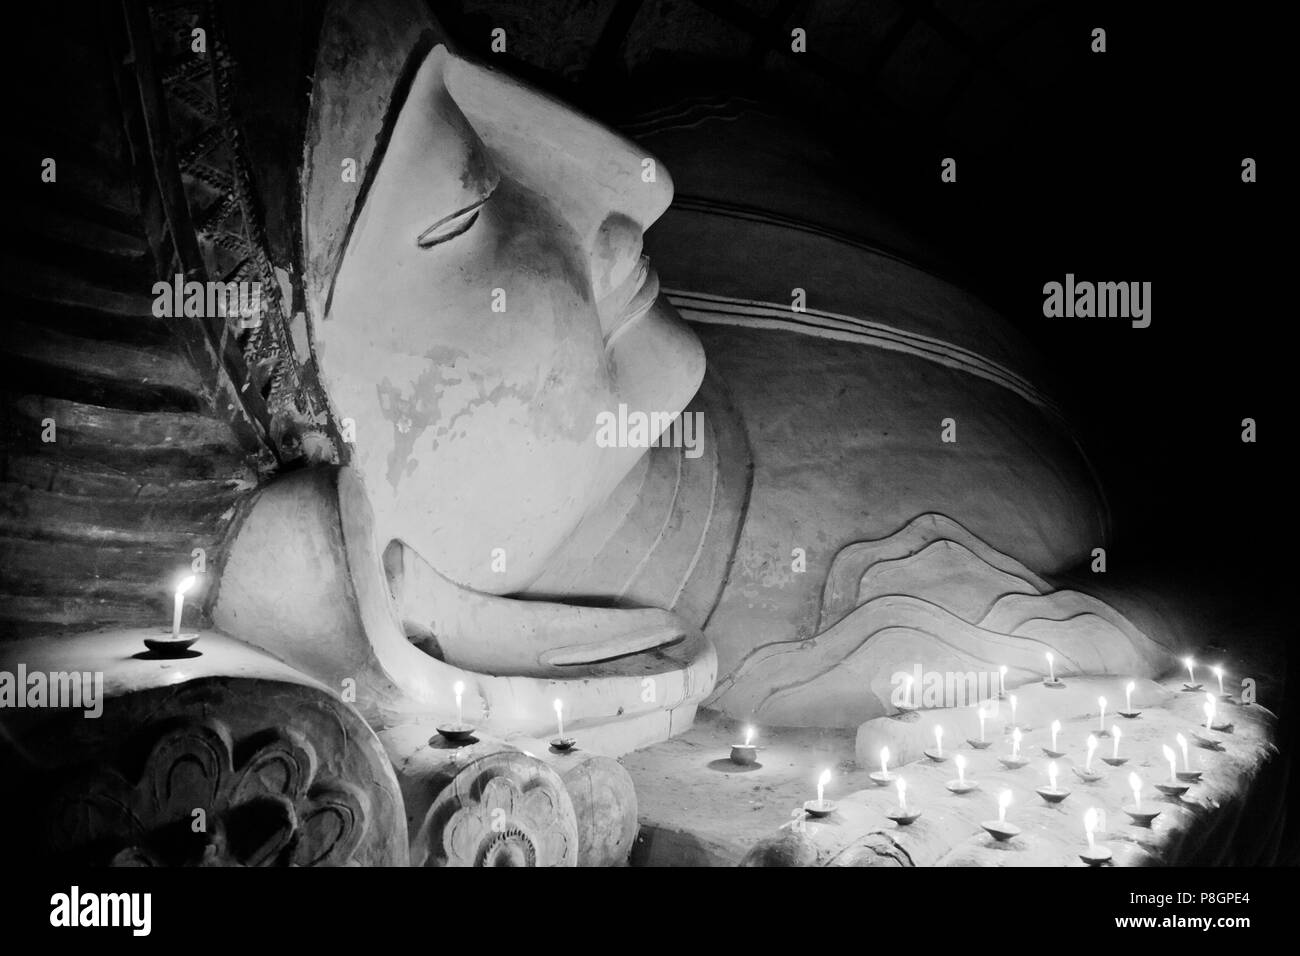 Candle offerings to 11th century reclining BUDDHA at SHINBINTHAHLYAUNG TEMPLE - BAGAN, MYANMAR Stock Photo